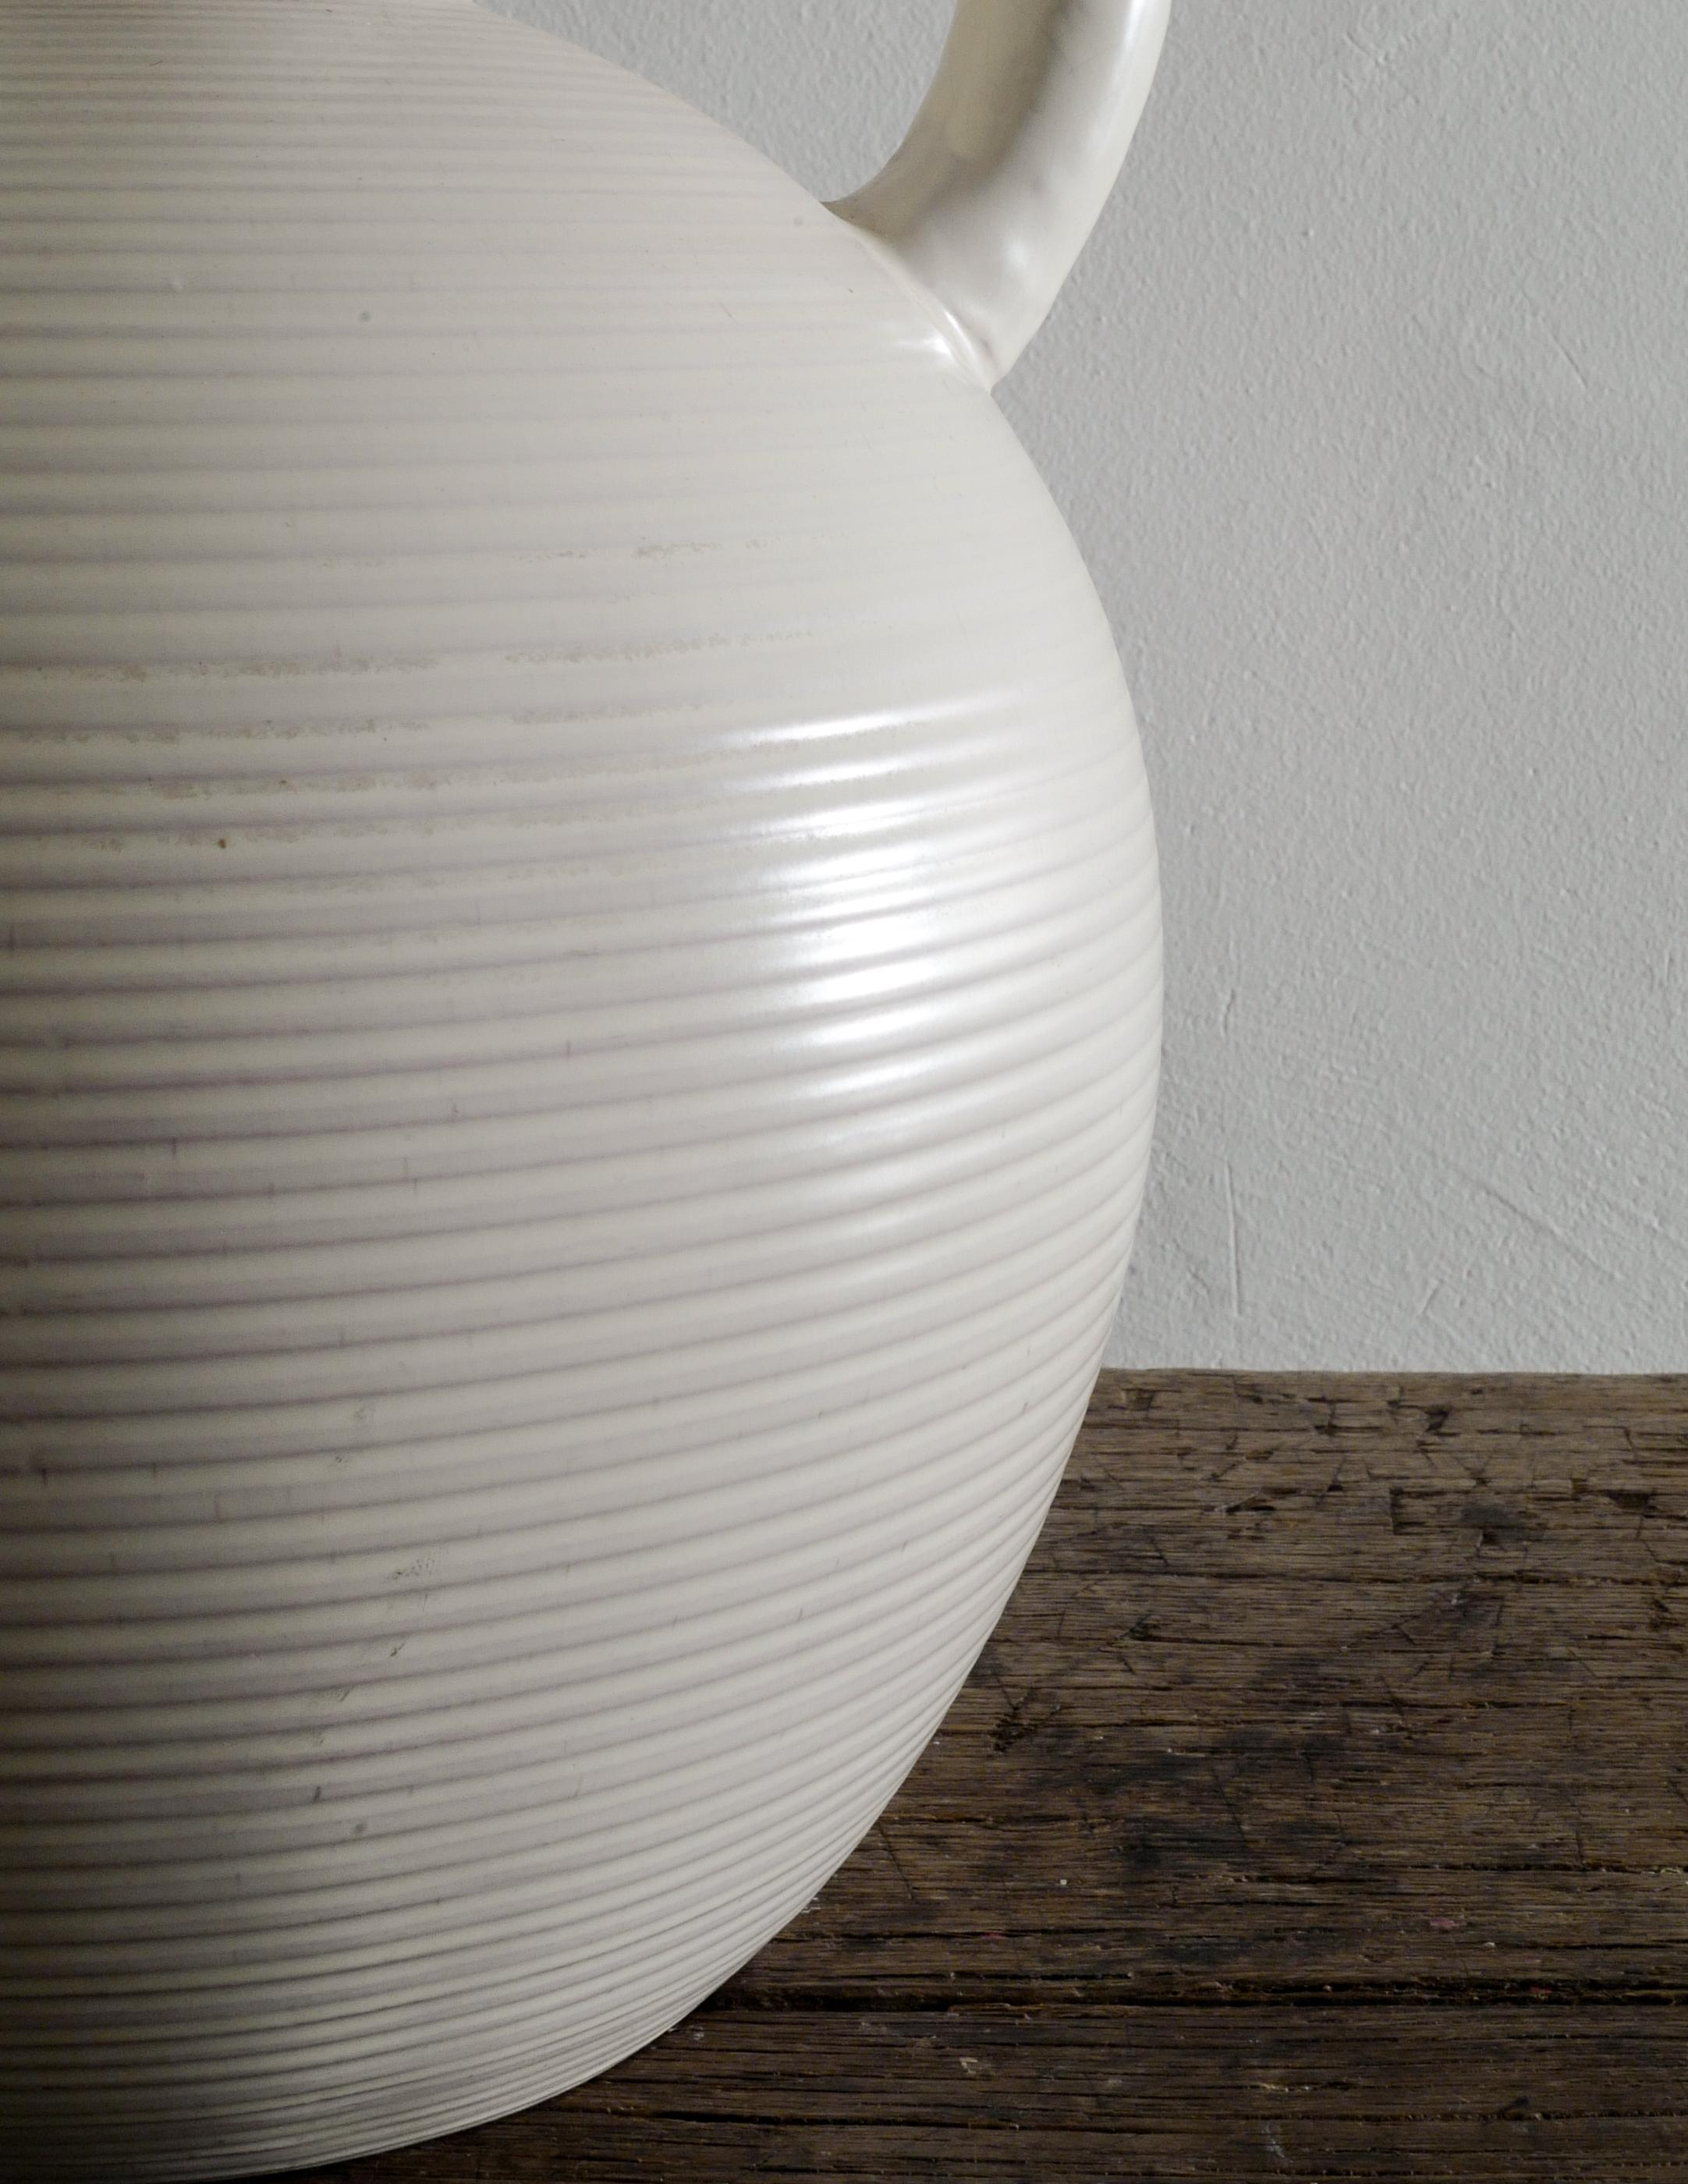 Stoneware White Floorvase Planter by John Andersson for Höganäs Produced in Sweden, 1950s For Sale